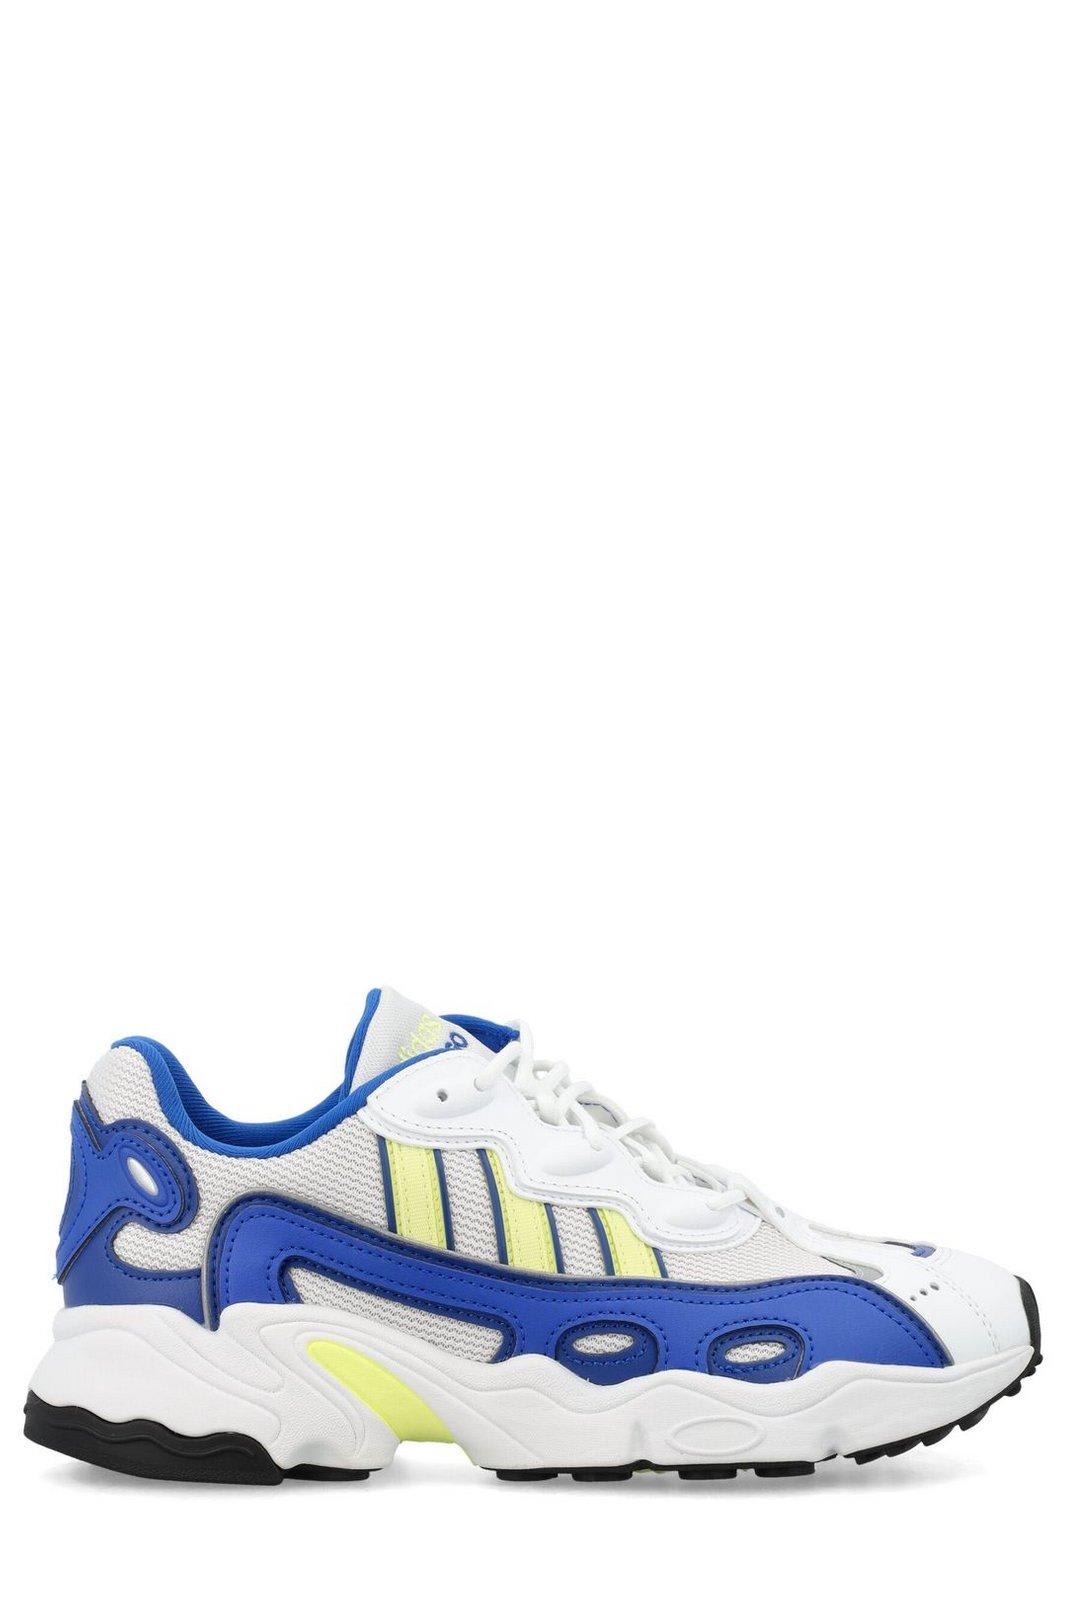 Shop Adidas Originals Ozweego Lace-up Sneakers In Ftwwht/pulyel/royblu